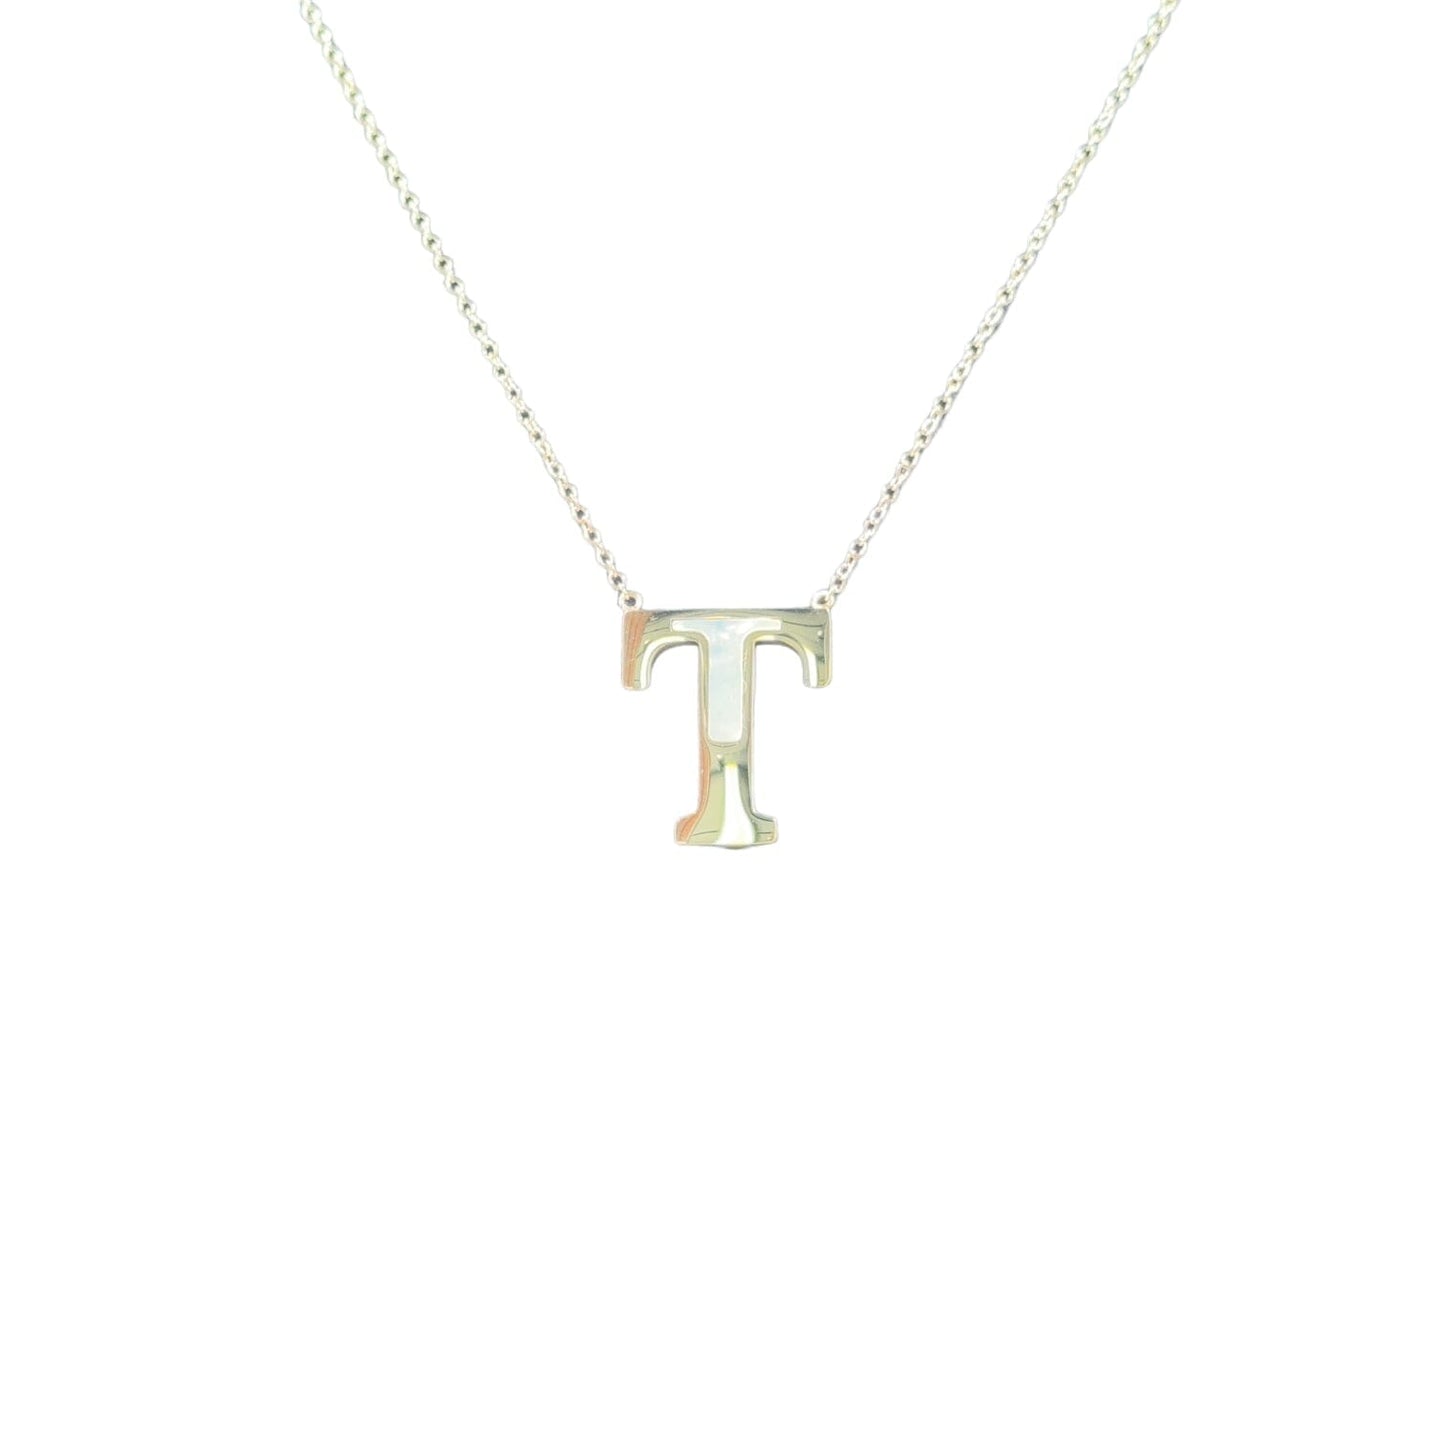 Mother of Pearl 18k Gold Initial Necklace Necklaces TRENDZIO T 